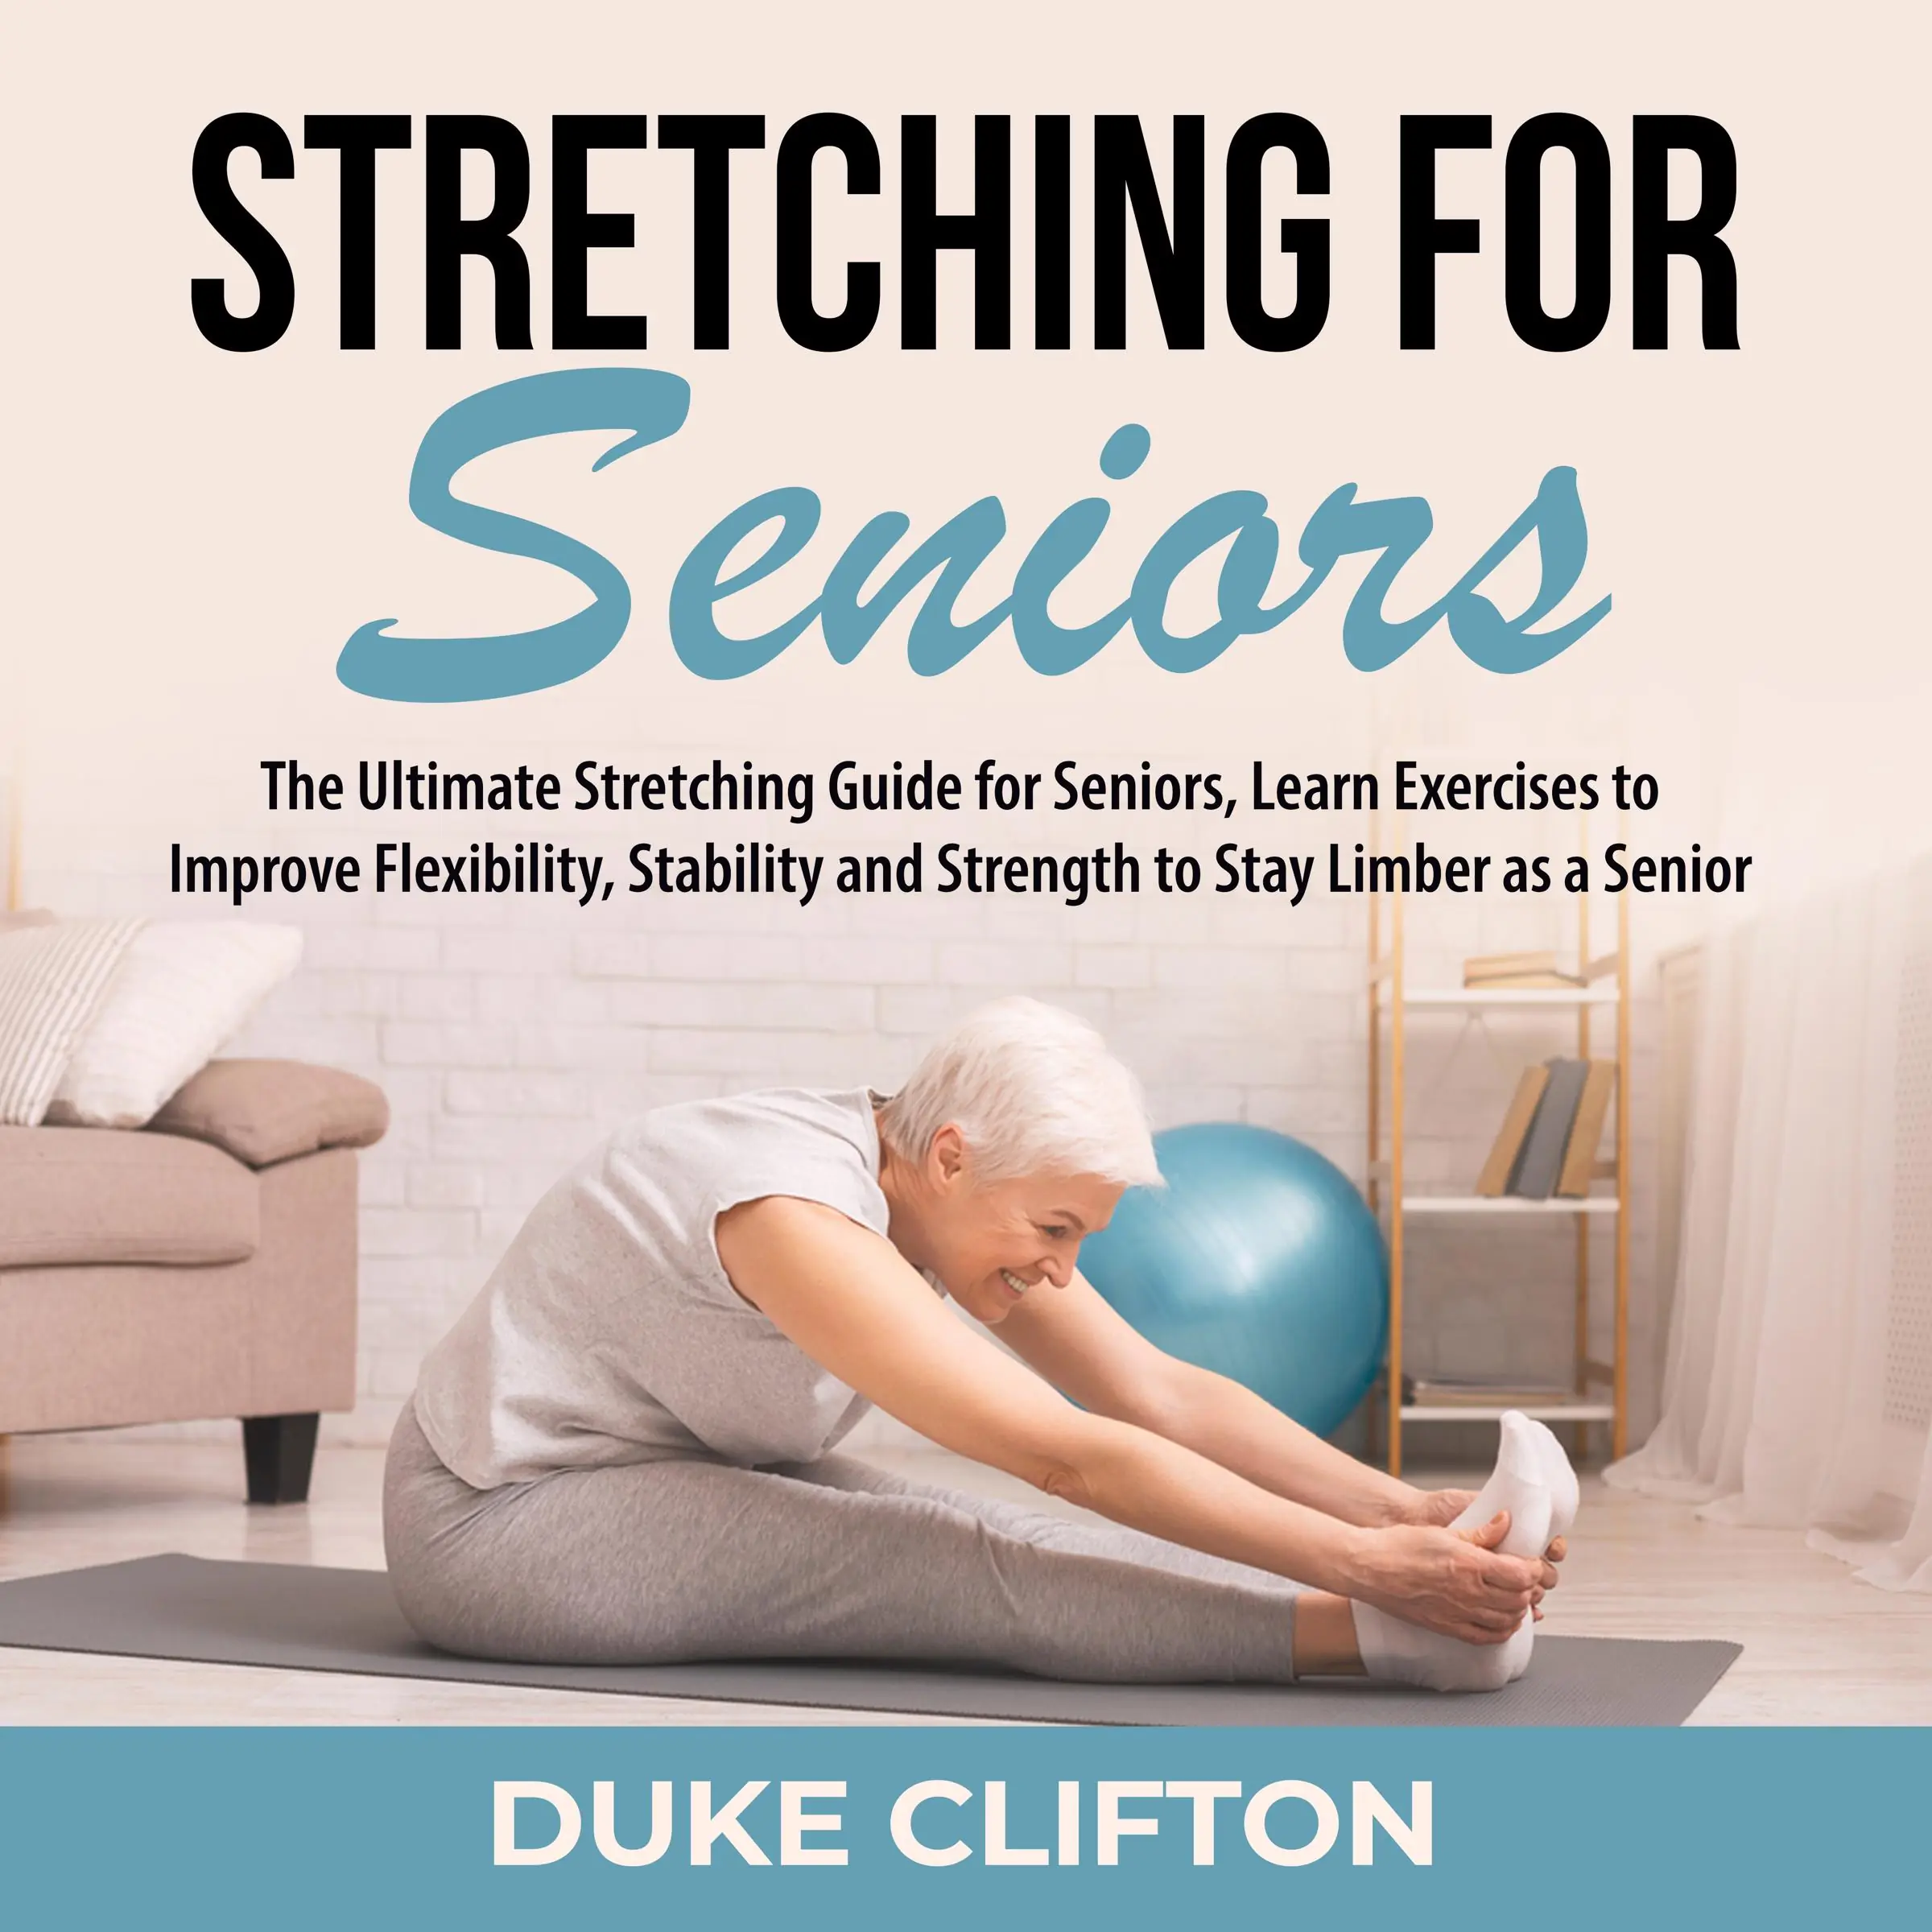 Stretching for Seniors: The Ultimate Stretching Guide for Seniors, Learn Exercises to Improve Flexibility, Stability and Strength to Stay Limber as a Senior by Duke Clifton Audiobook